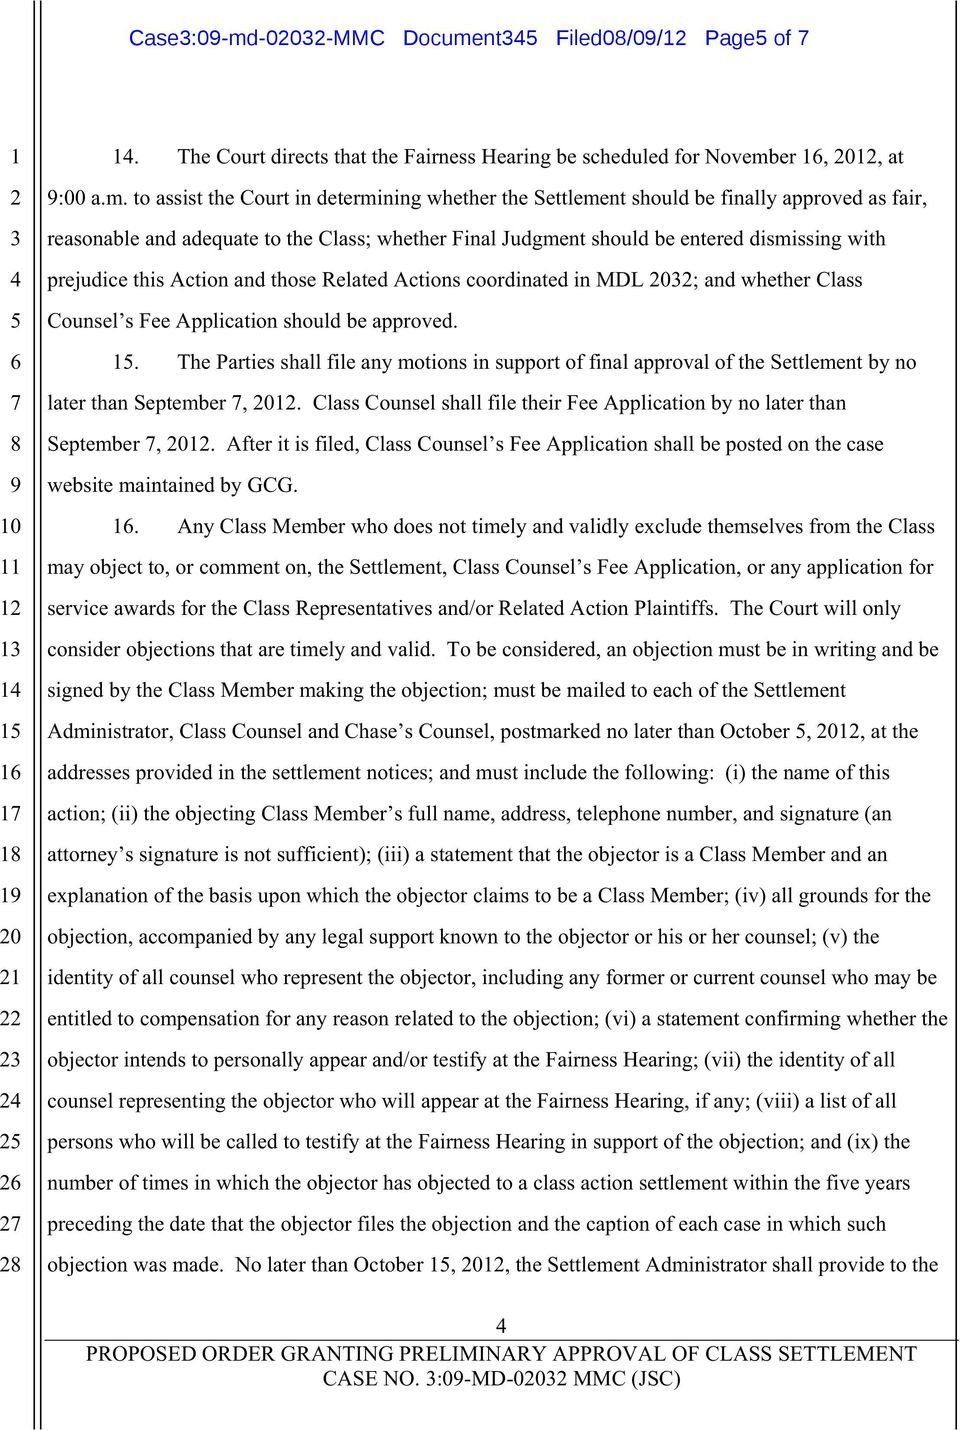 nt Filed0/0/1 Page of 1 1 1 1 1 1 0 1 1. The Court directs that the Fairness Hearing be scheduled for Novemb